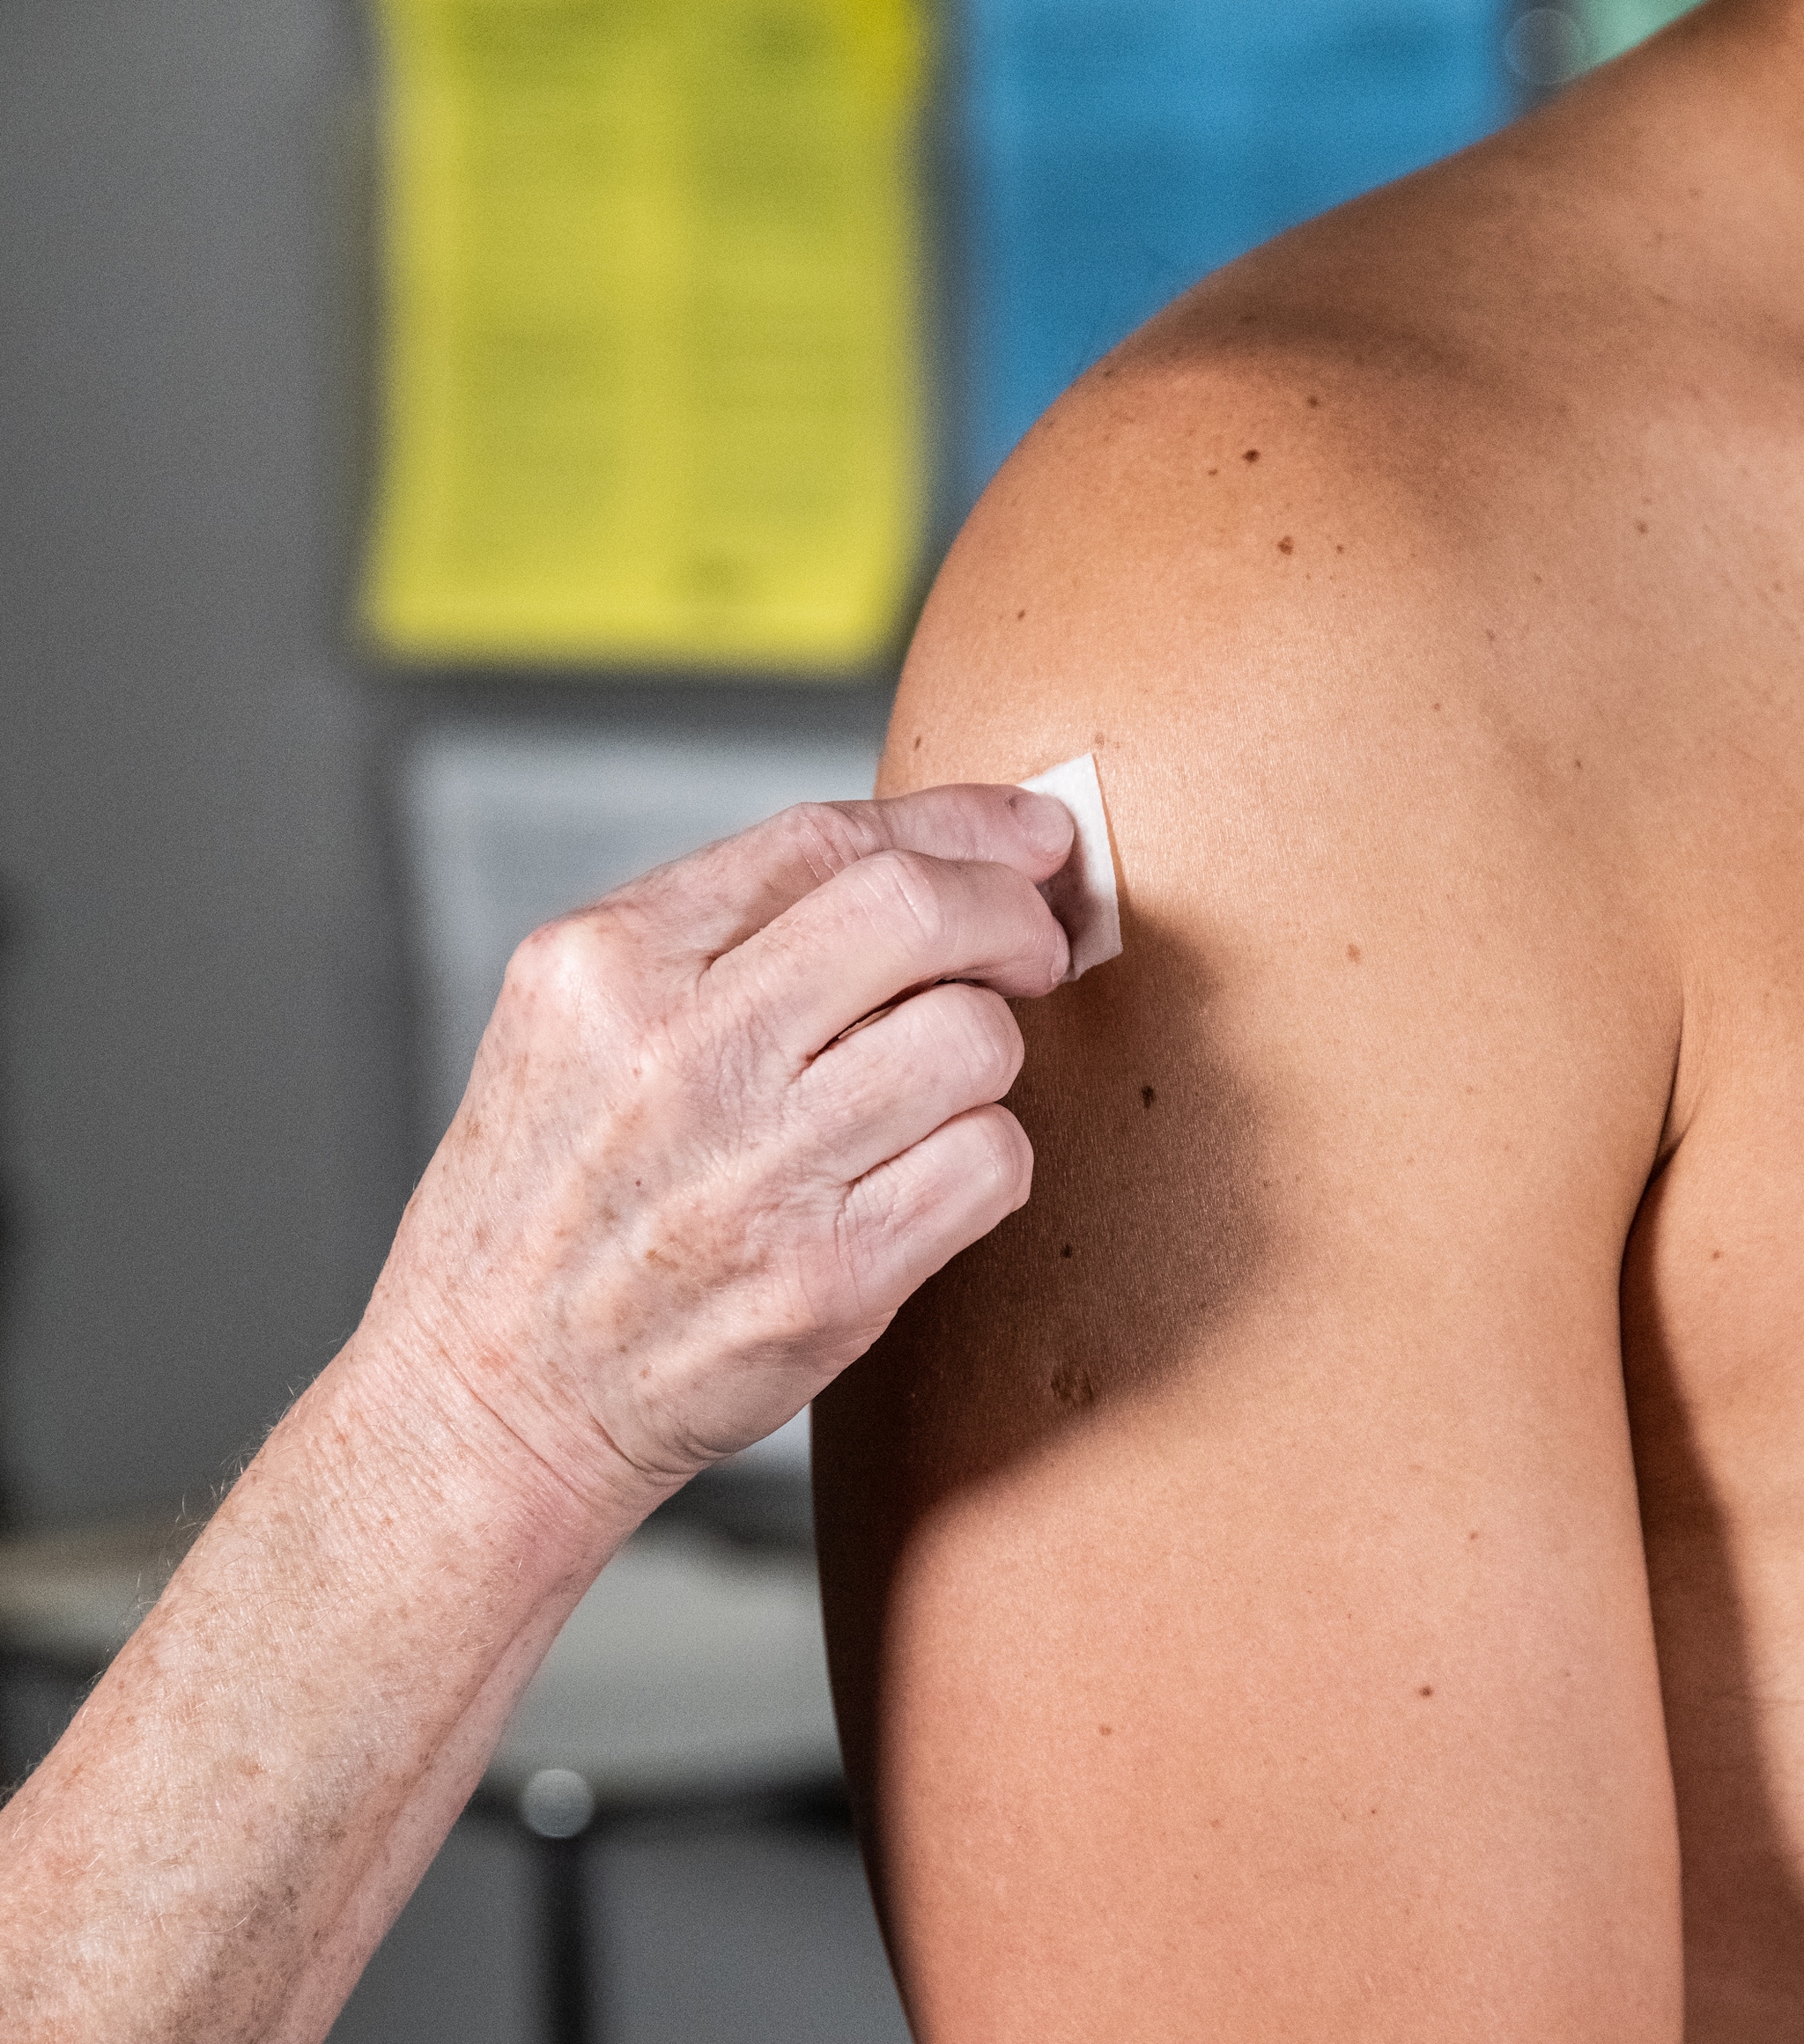 Example of intradermal administration at the deltoid.